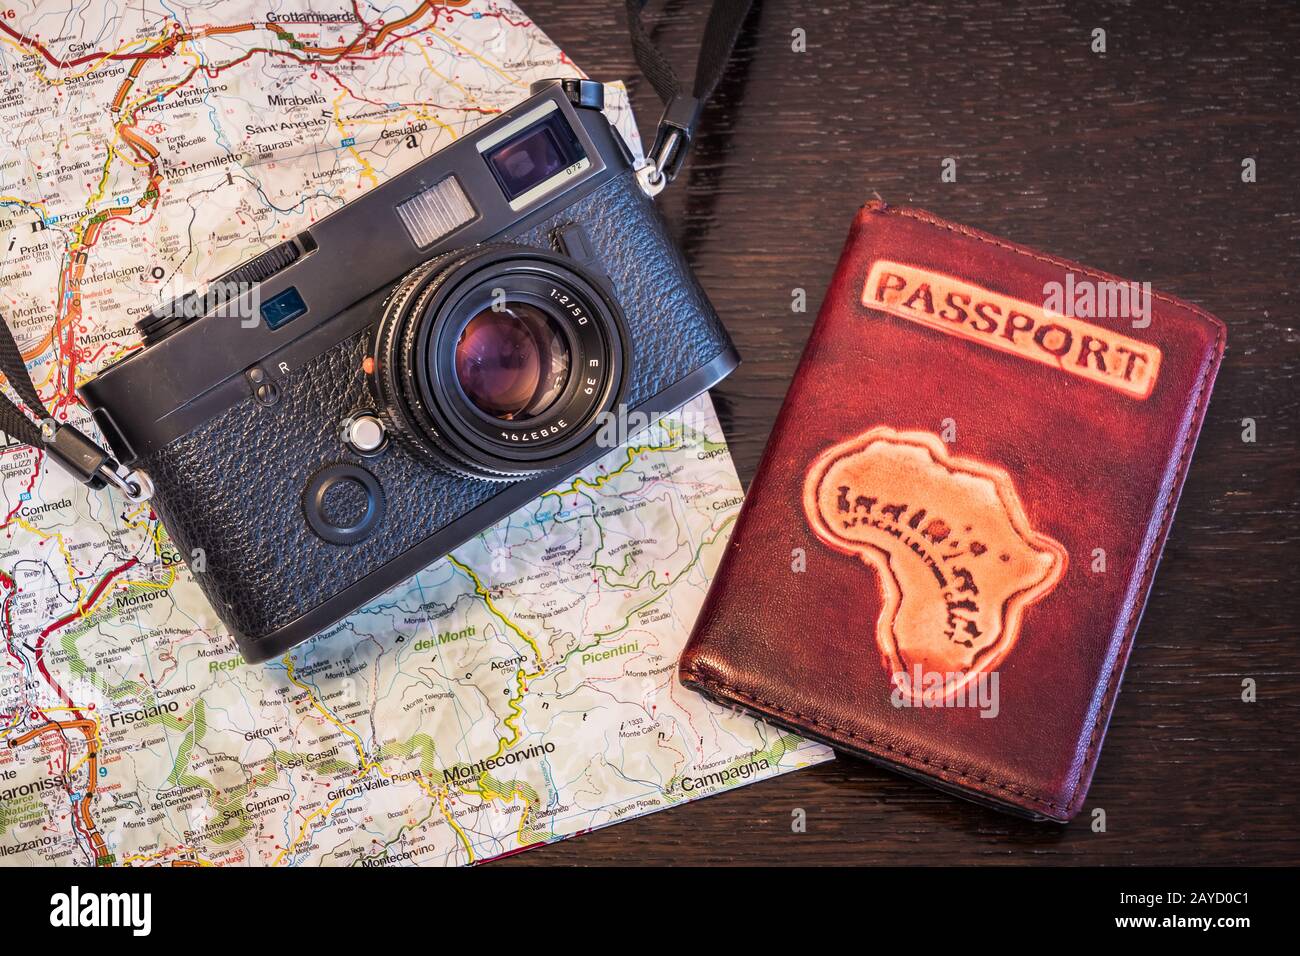 Travel Photography Concept - Black, Retro, Vintage Photo Camera, Passport and Map on a Dark Wood Background - Vintage Look Stock Photo